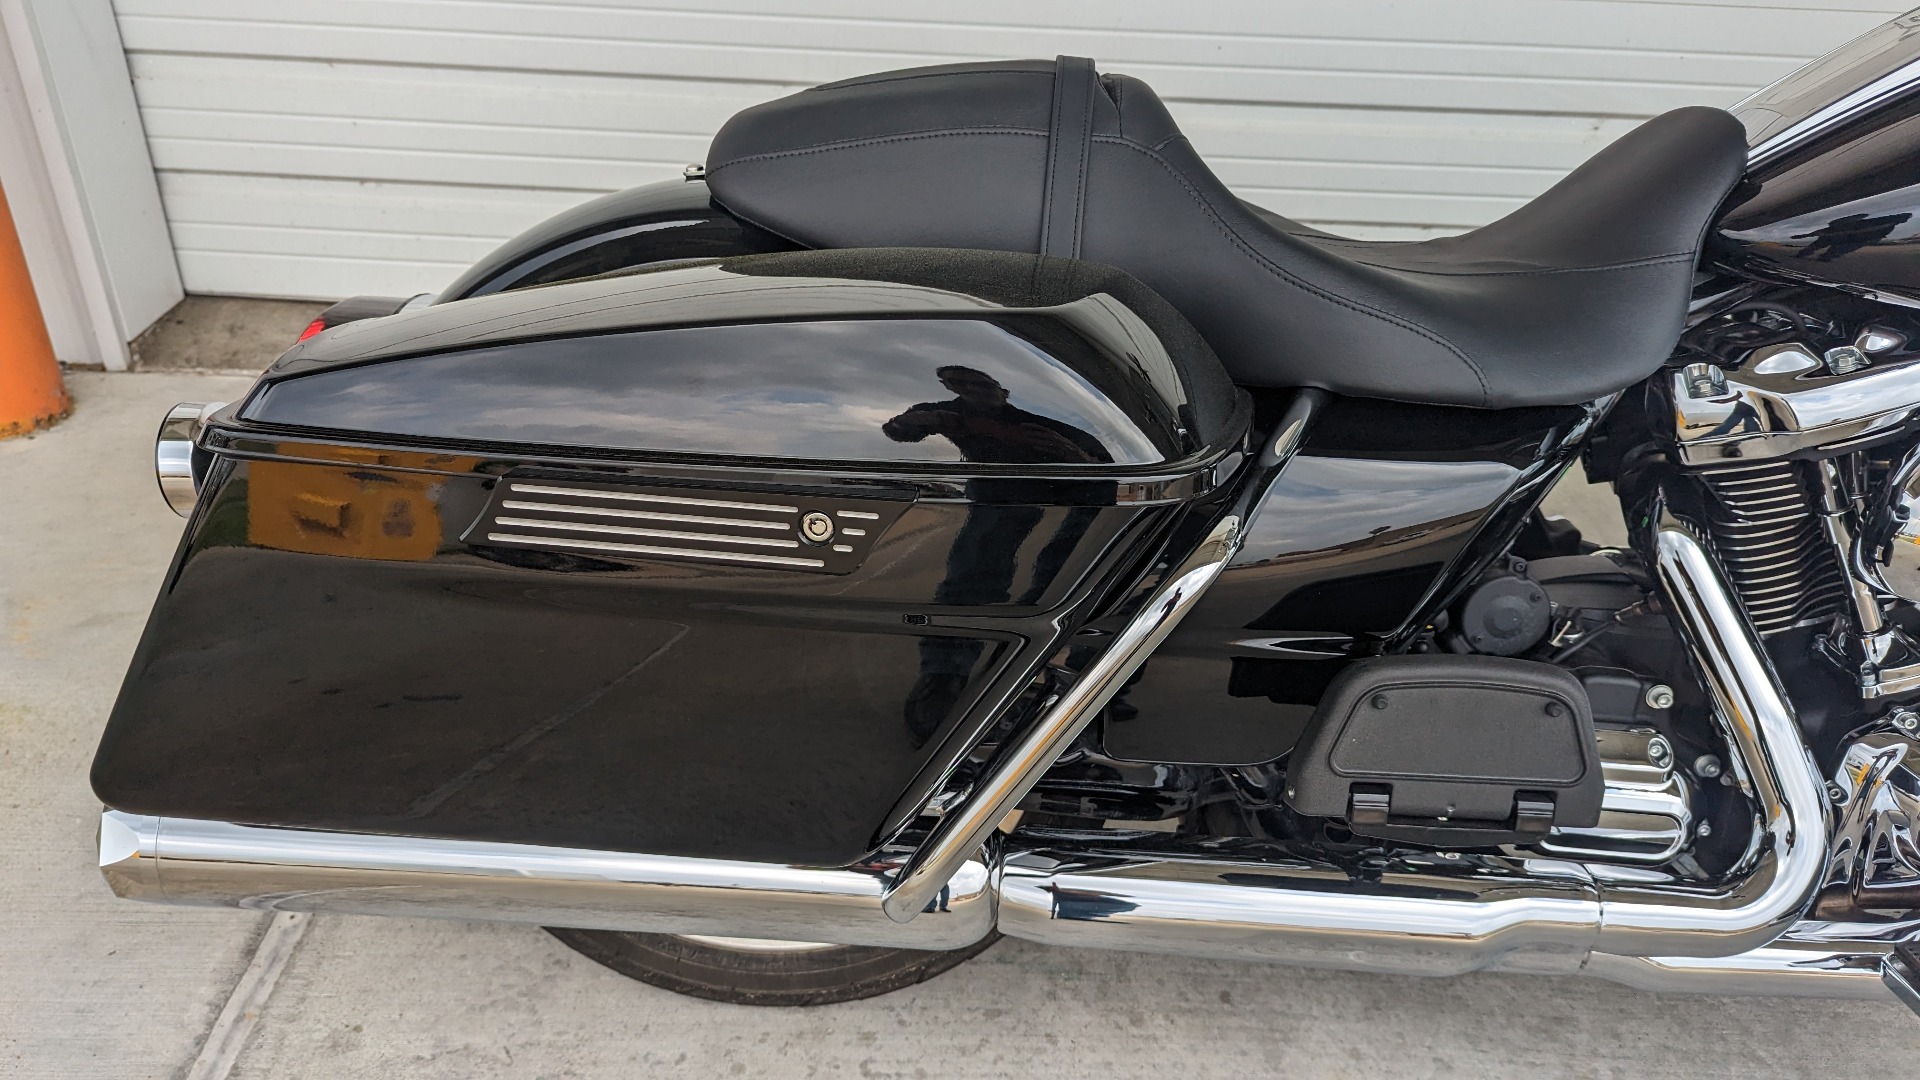 2021 harley-davidson road king with cam for sale in arkansas - Photo 5